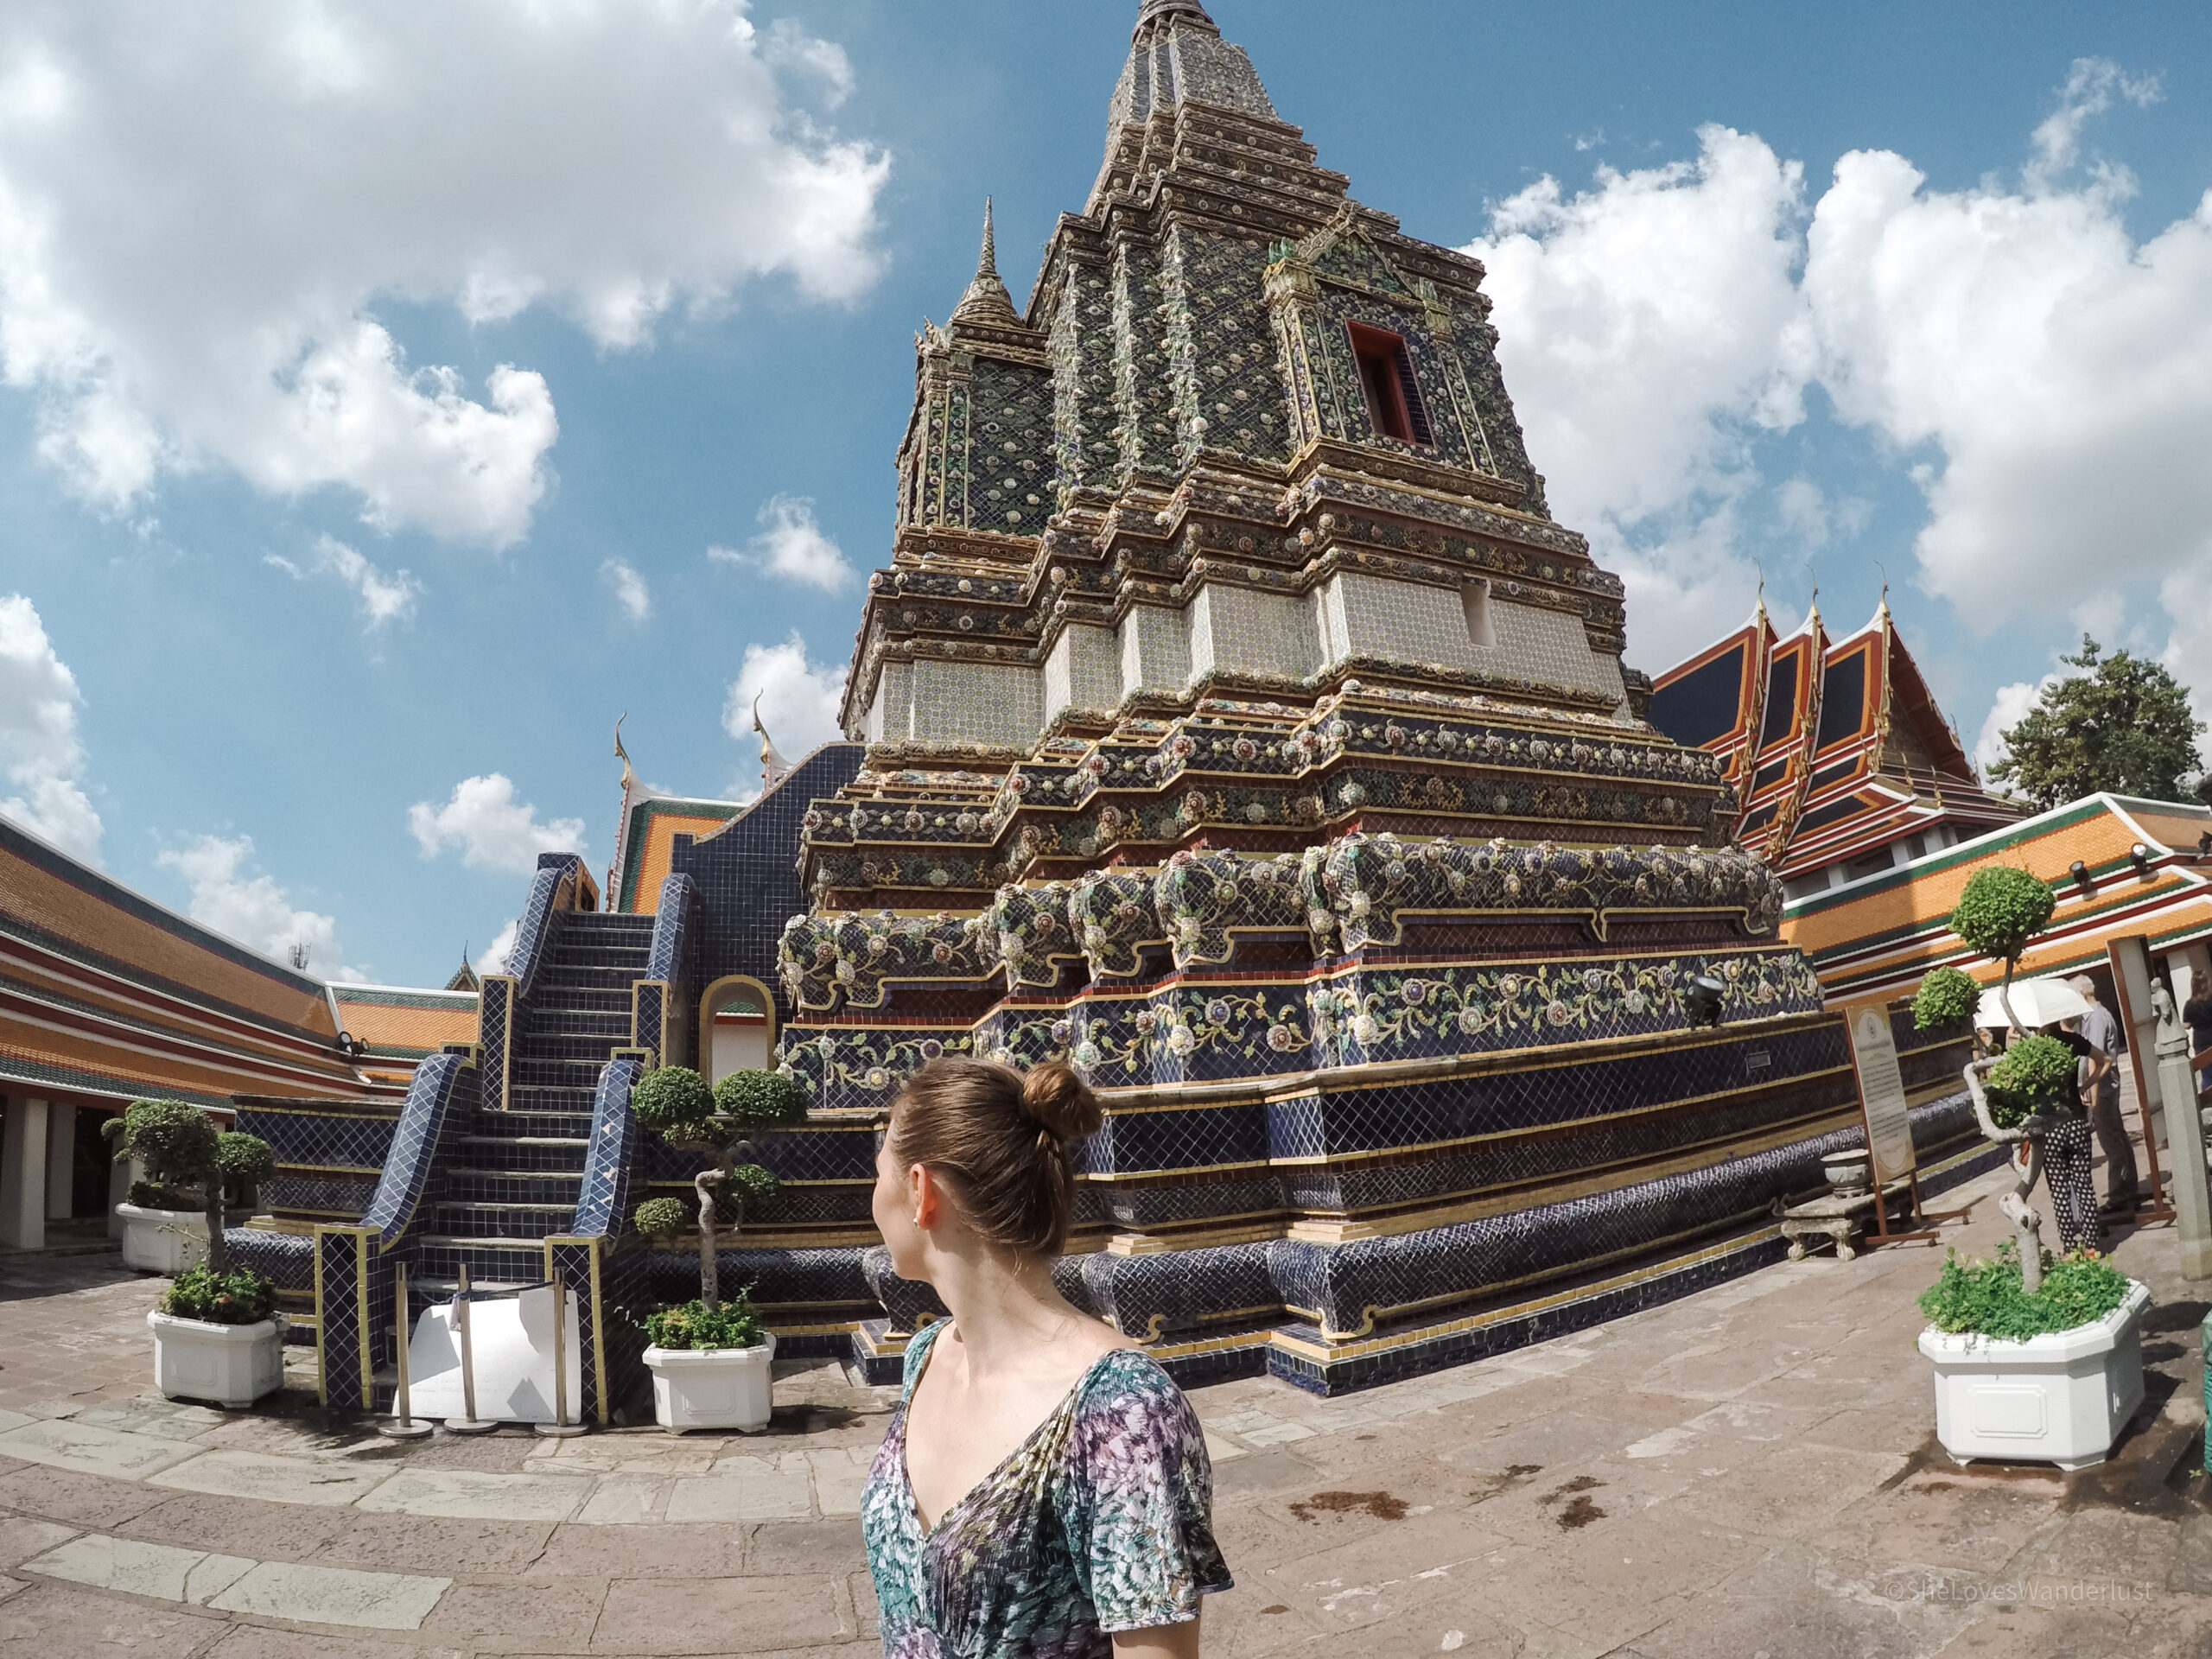 A girl standing in front of a temple in Bangkok, Thailand